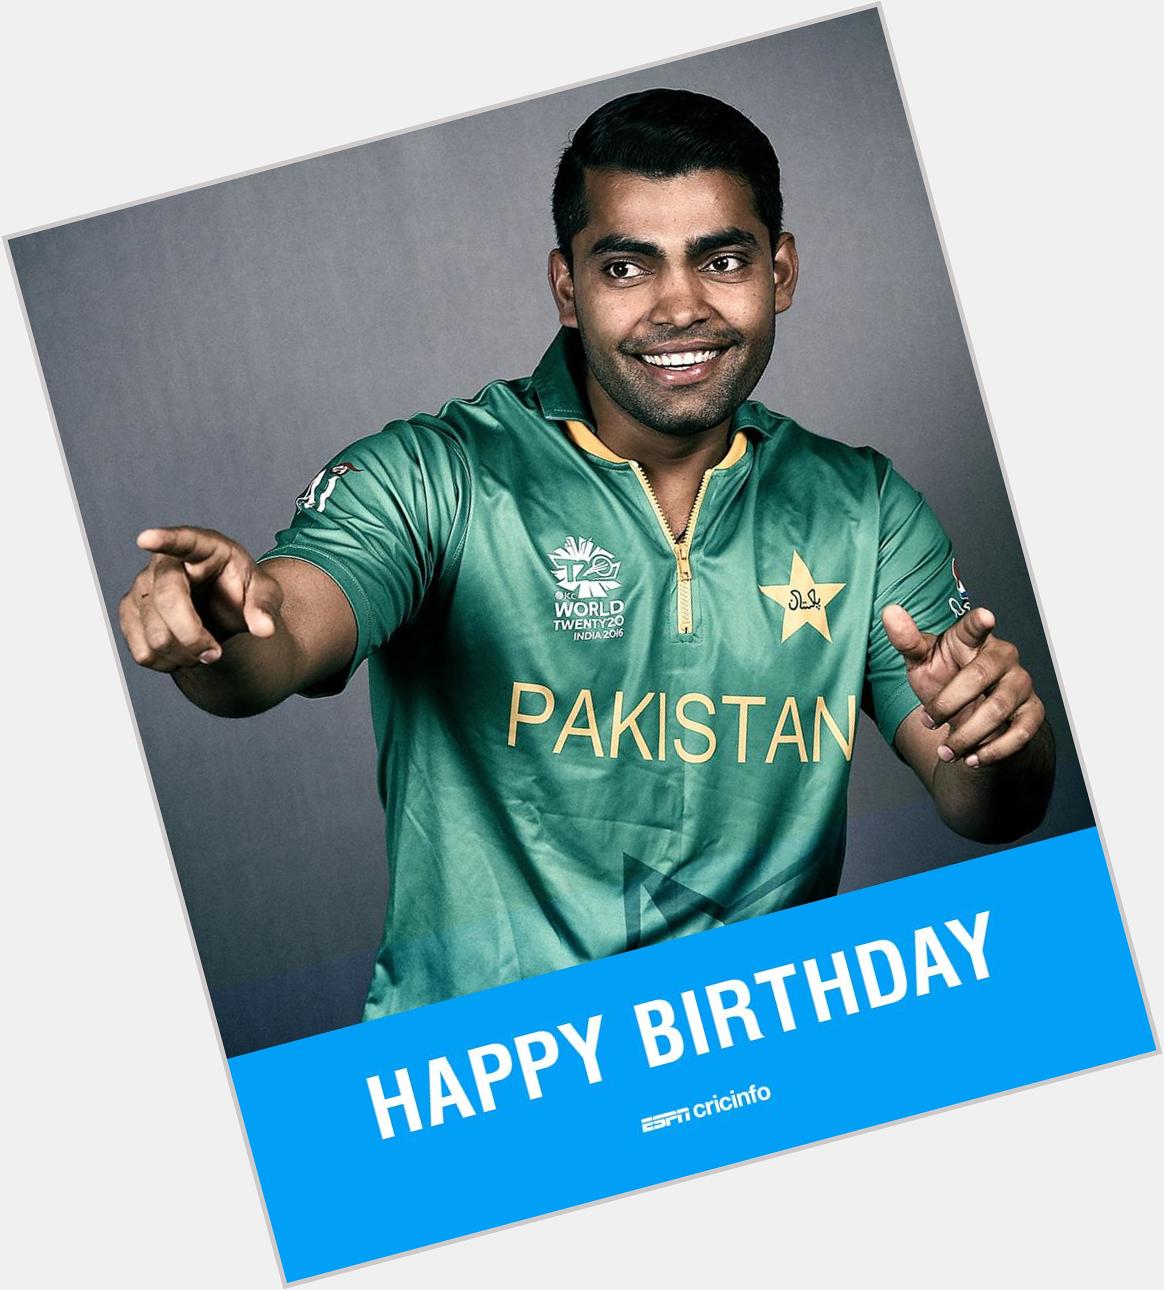  Happy birthday to Umar
Akmal! Will he make another comeback to
the Pakistan side soon?
